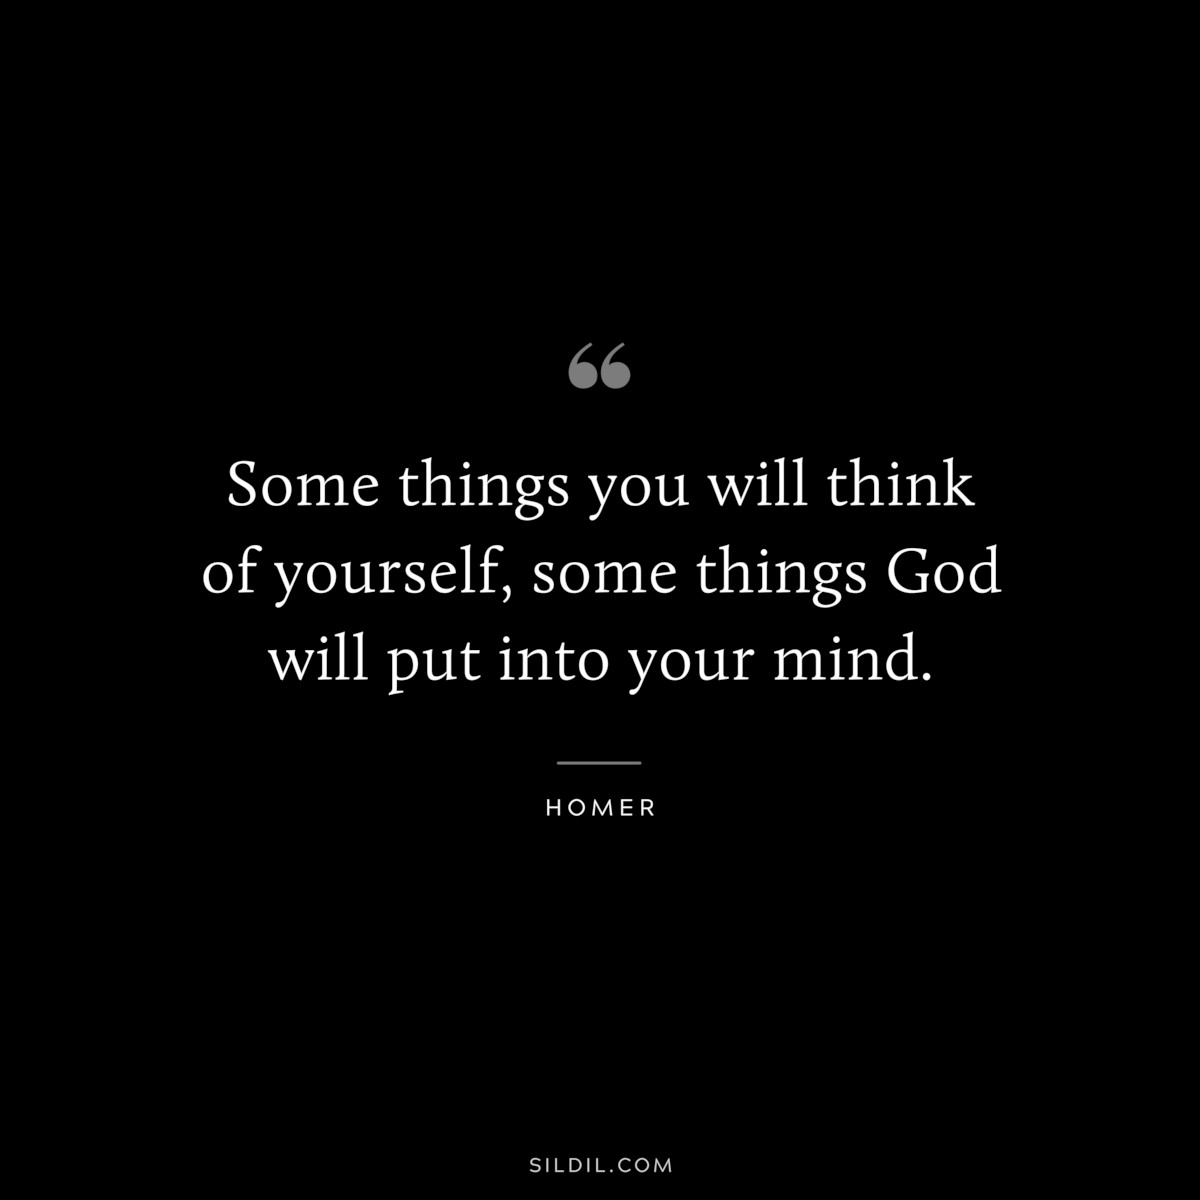 Some things you will think of yourself, some things God will put into your mind. ― Homer